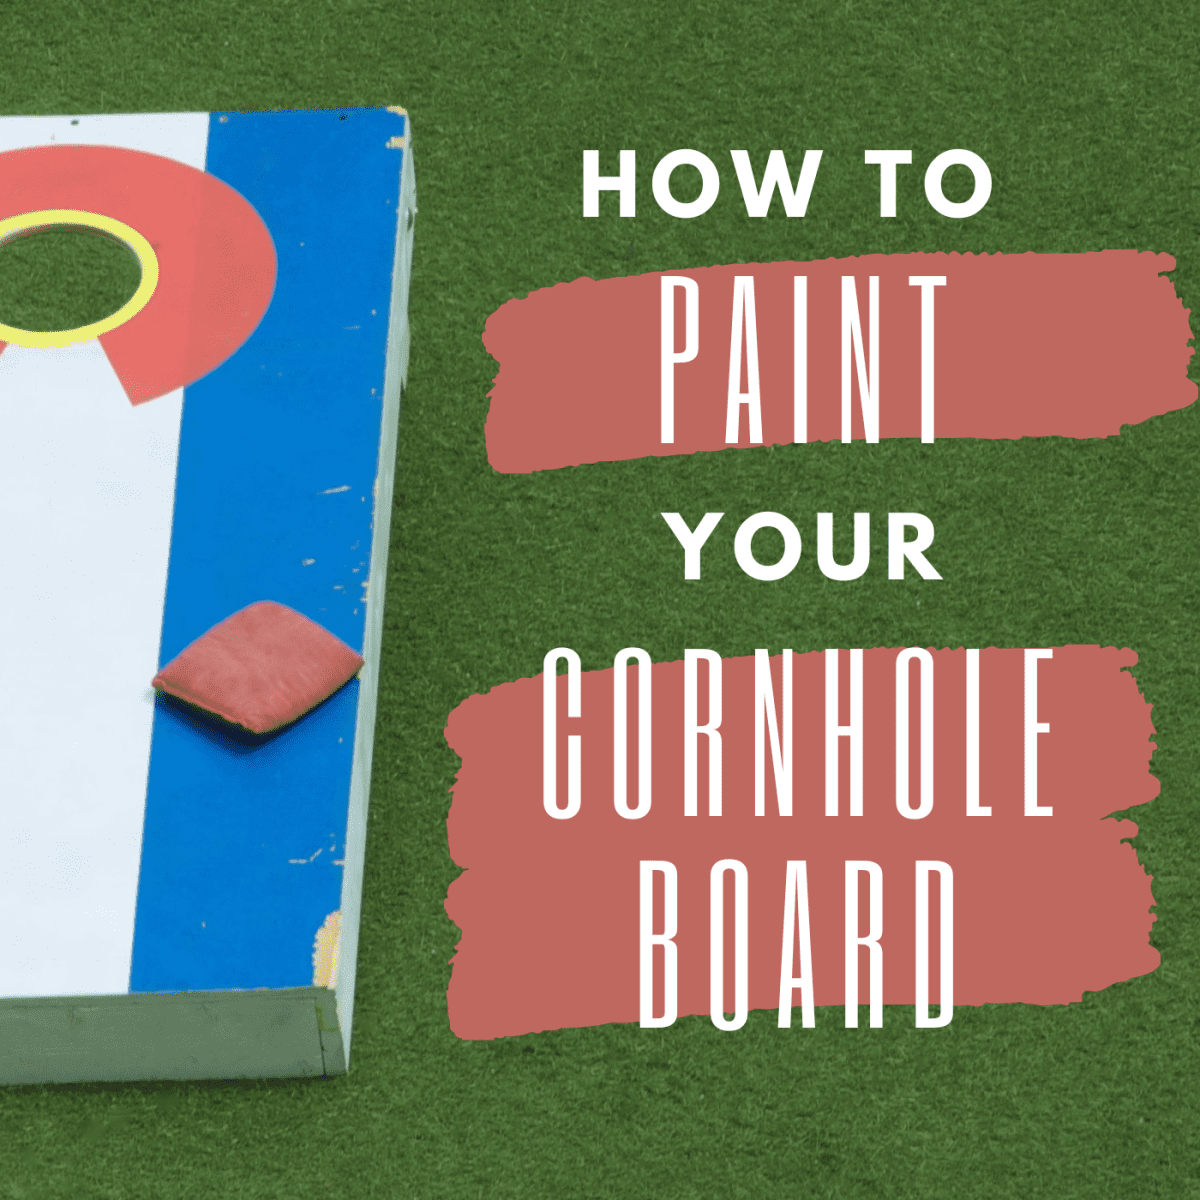 Painting Cornhole Boards  i should be mopping the floor